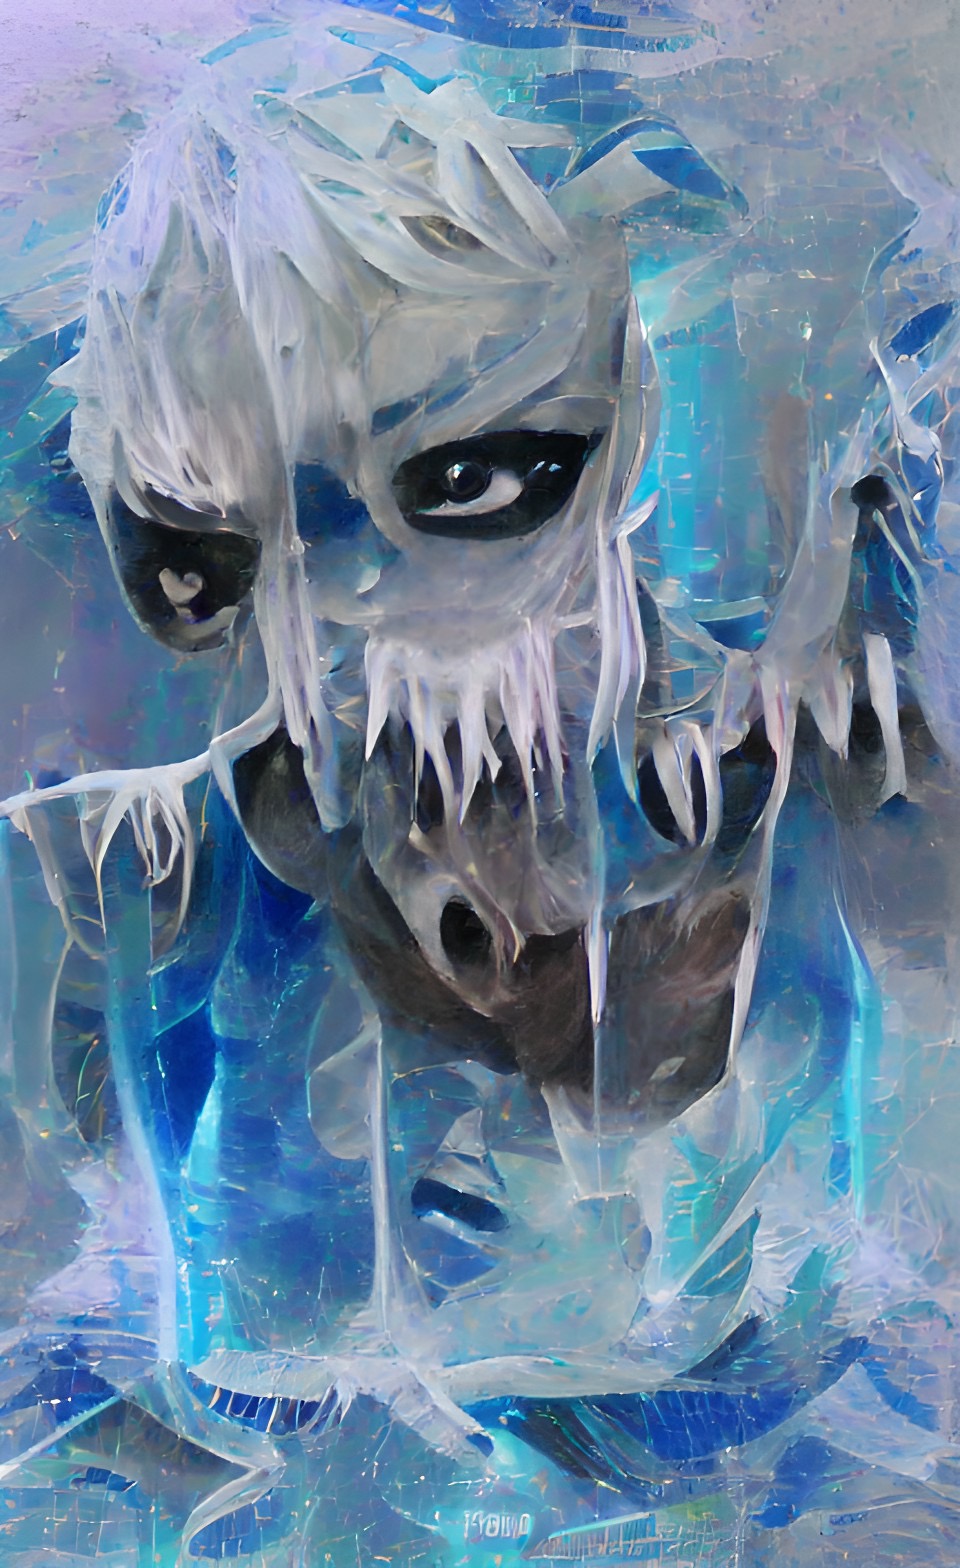 Ice Ghoul #1177